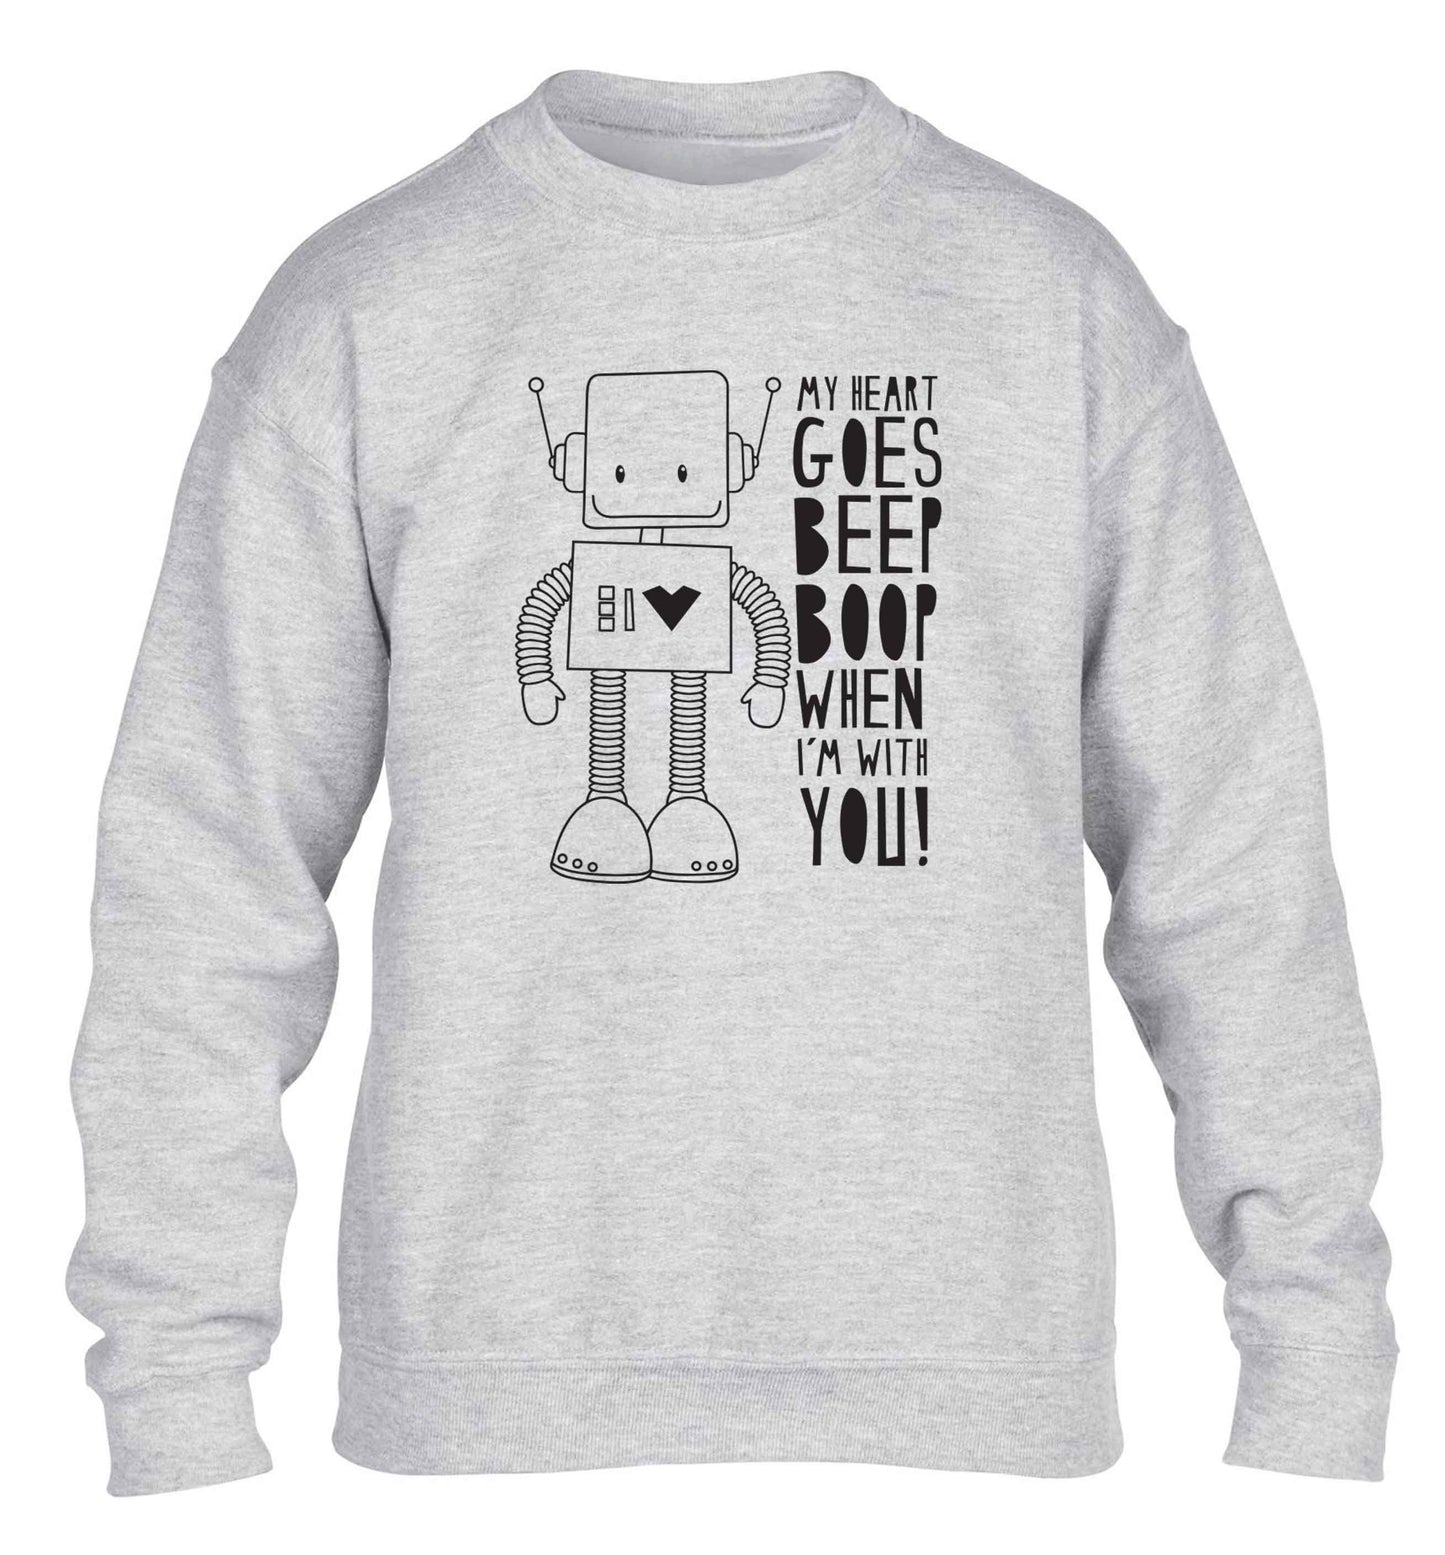 My heart goes beep boop when I'm with you children's grey sweater 12-13 Years